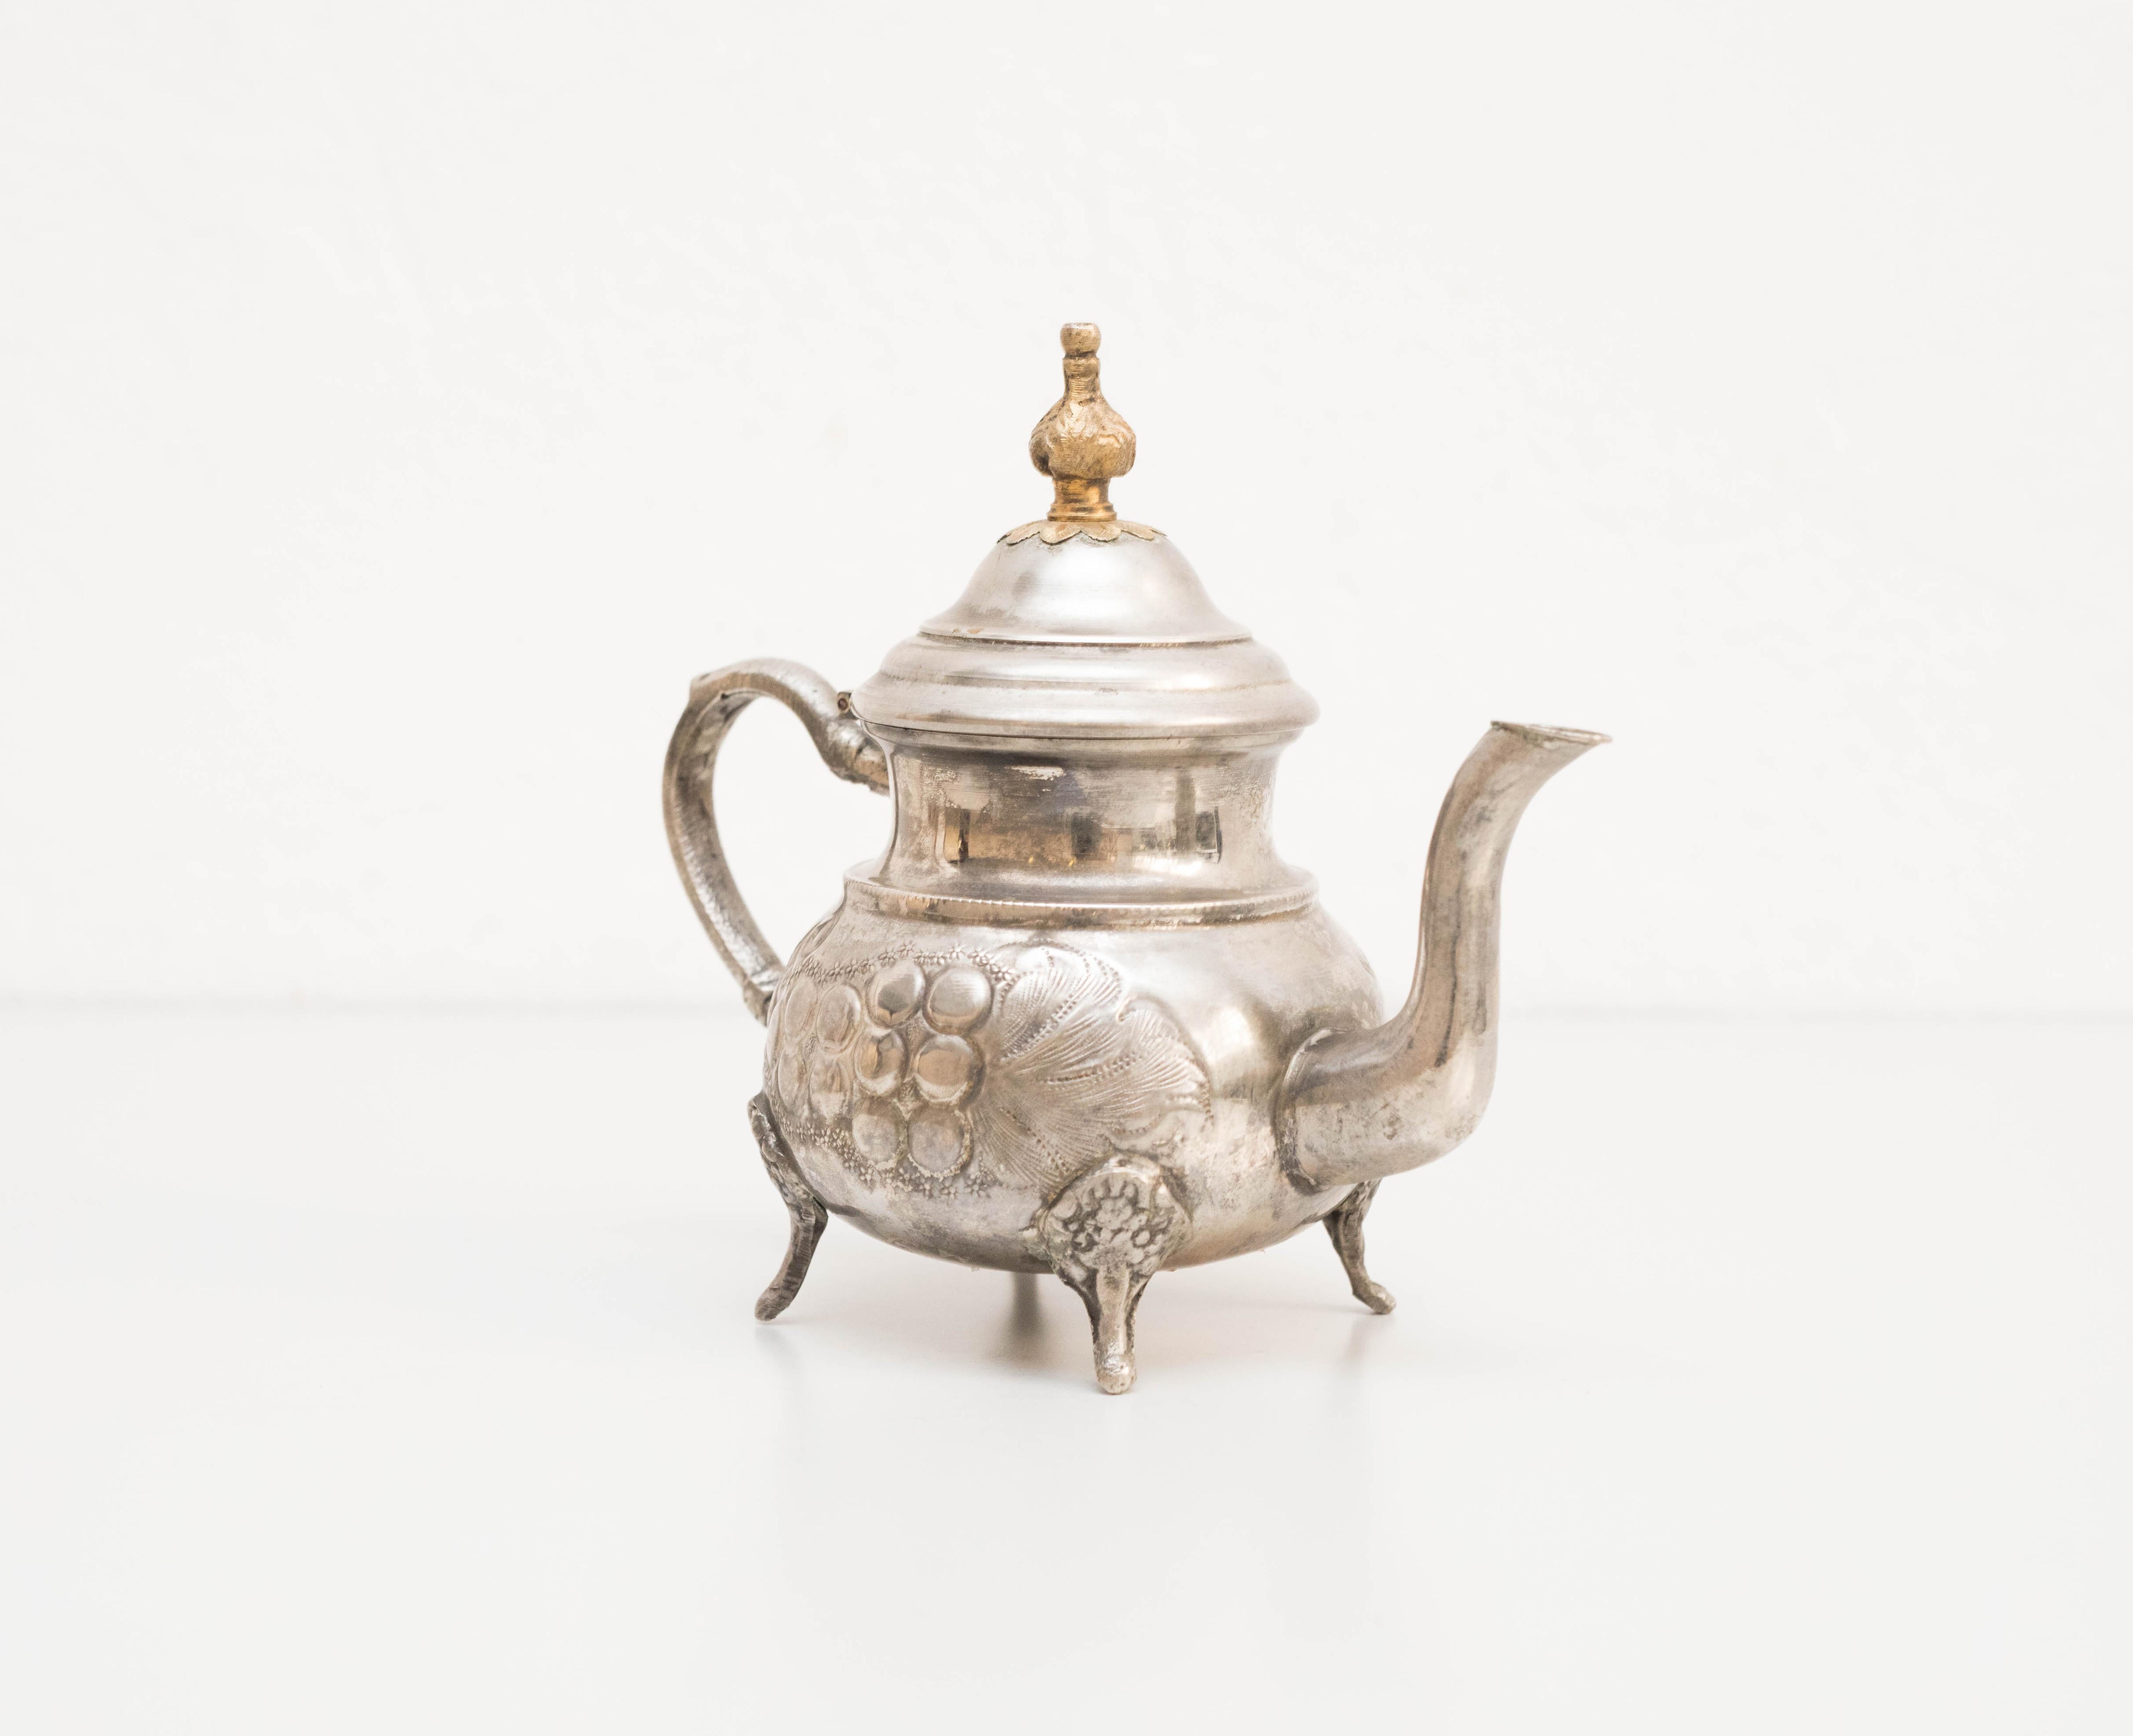 20th century Brass teapot.
By unknown manufacturer, Spain.

In original condition, with minor wear consistent with age and use, preserving a beautiful patina.

Materials:
Brass

Dimensions:
D 12 cm x W 23.5 cm x H 21 cm.